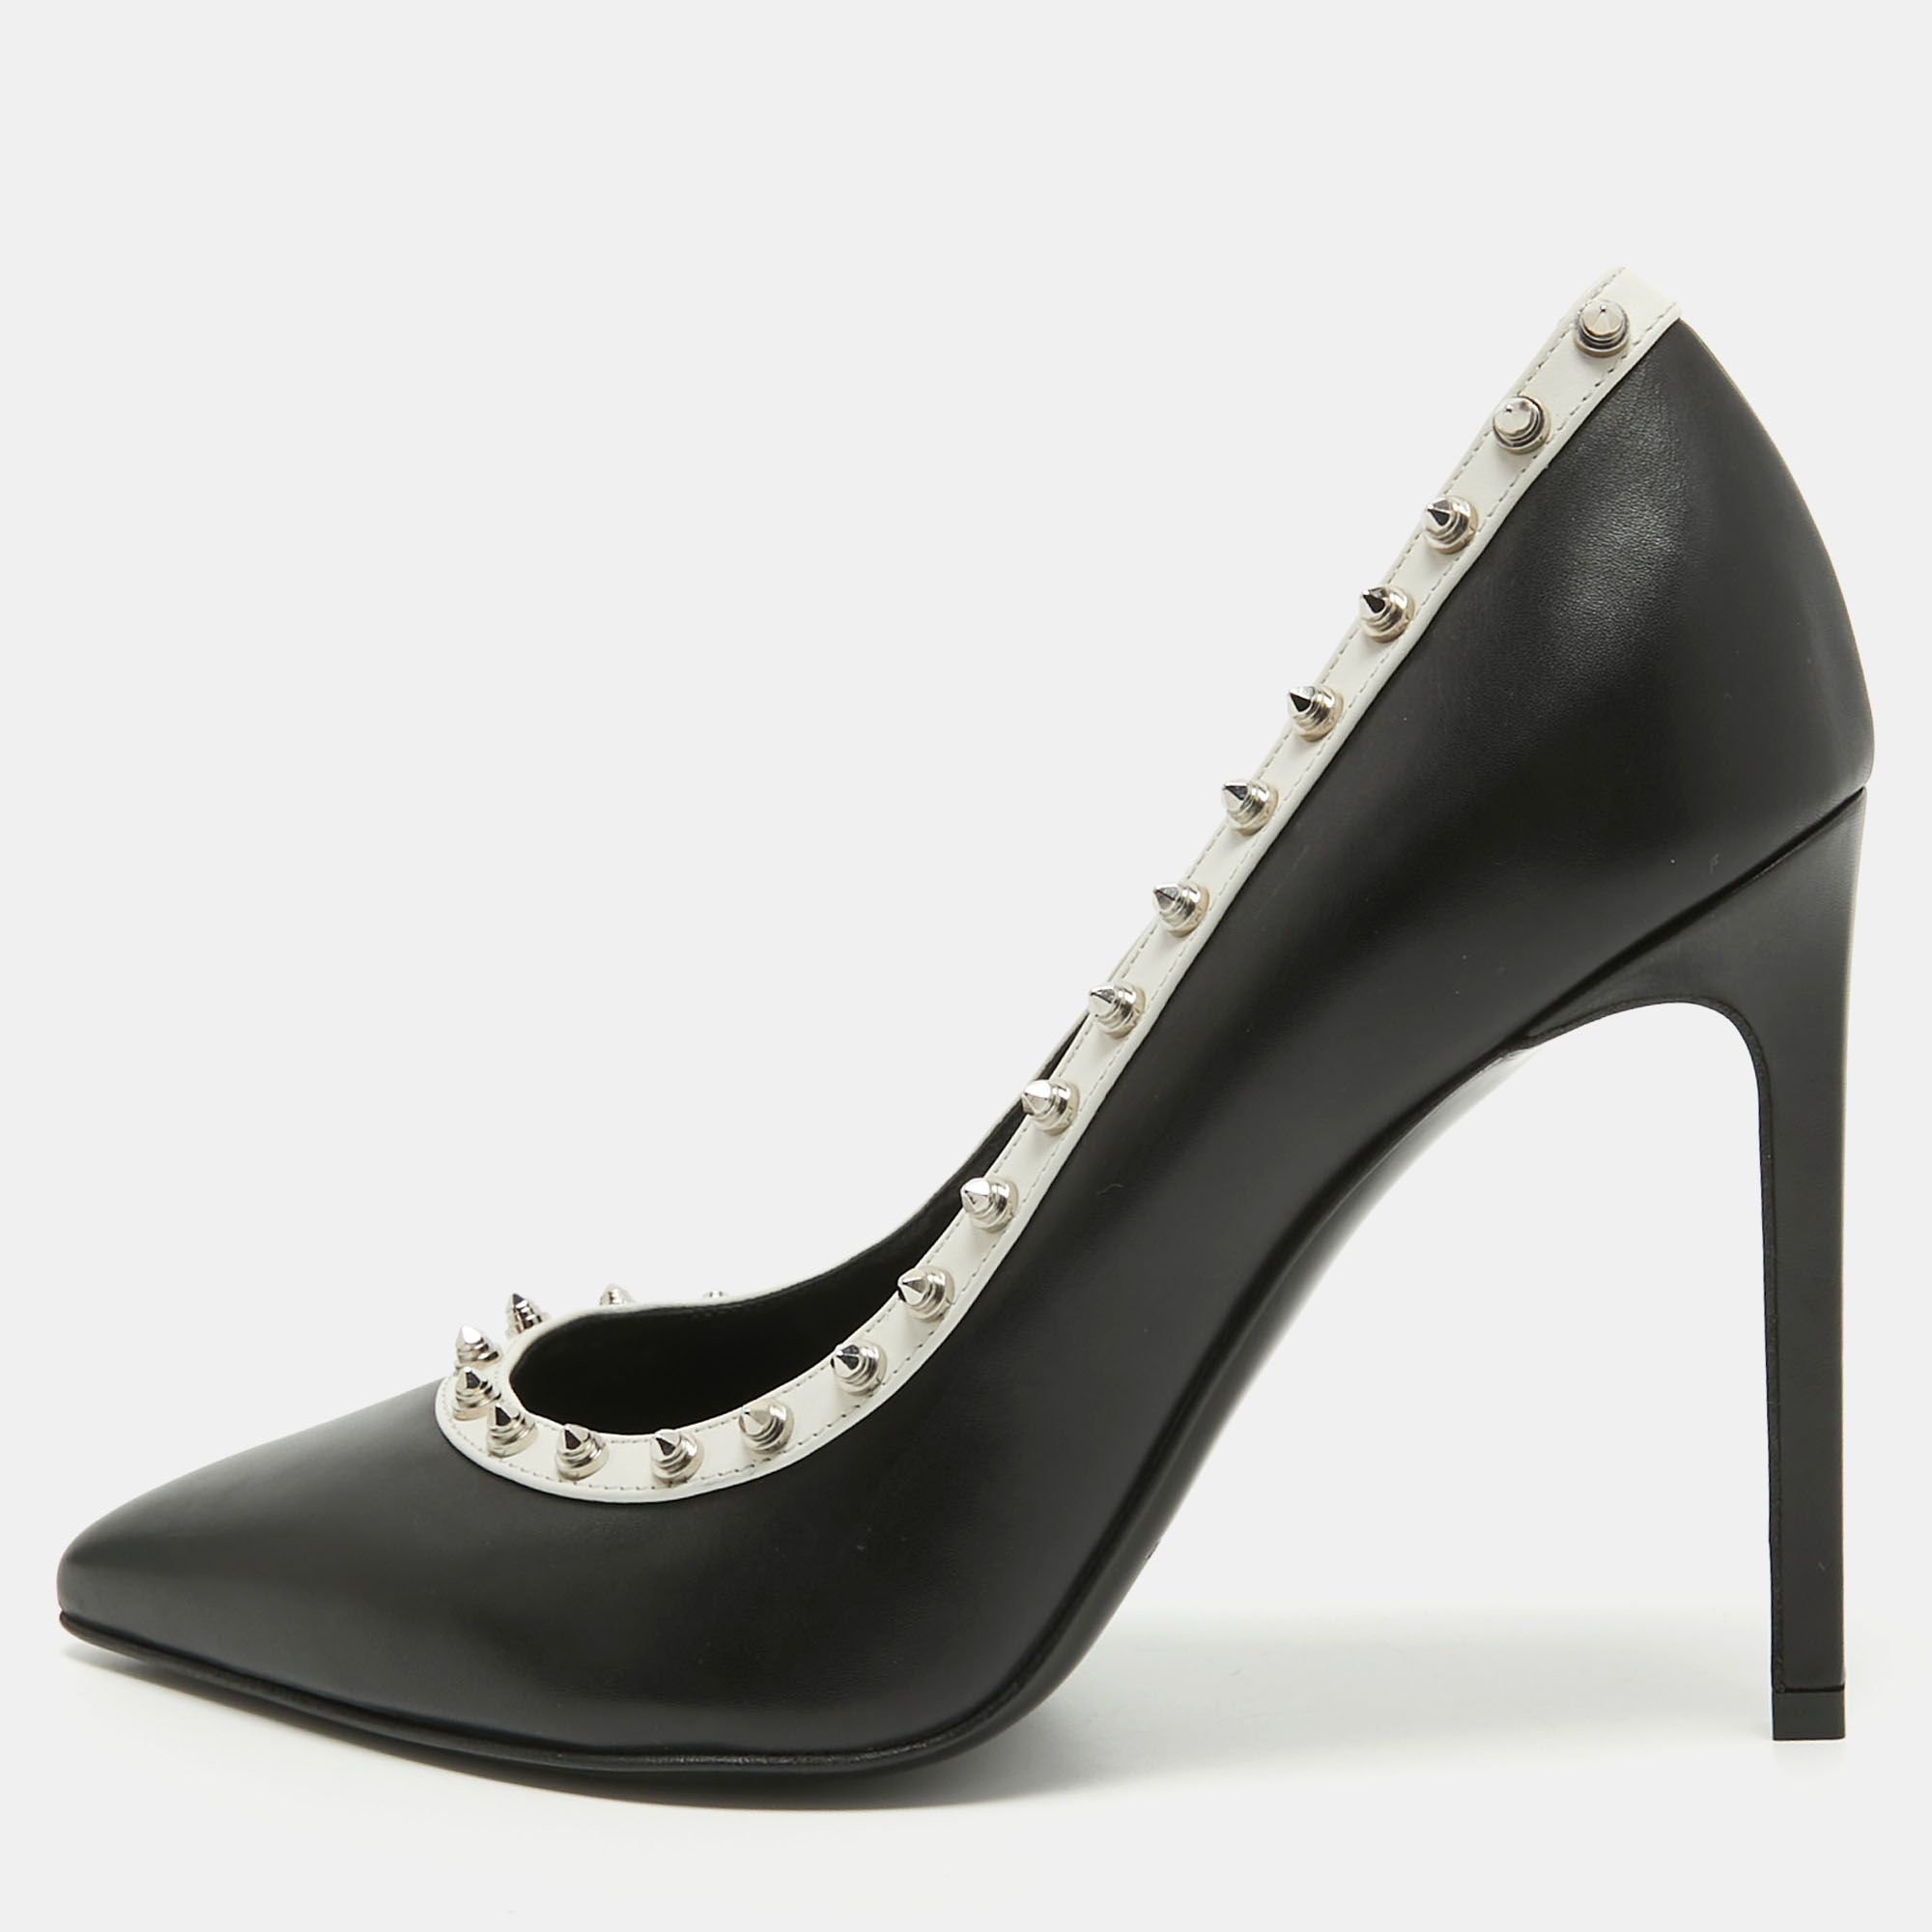 

Saint Laurent Black/White Leather Studded Pointed Toe Pumps Size